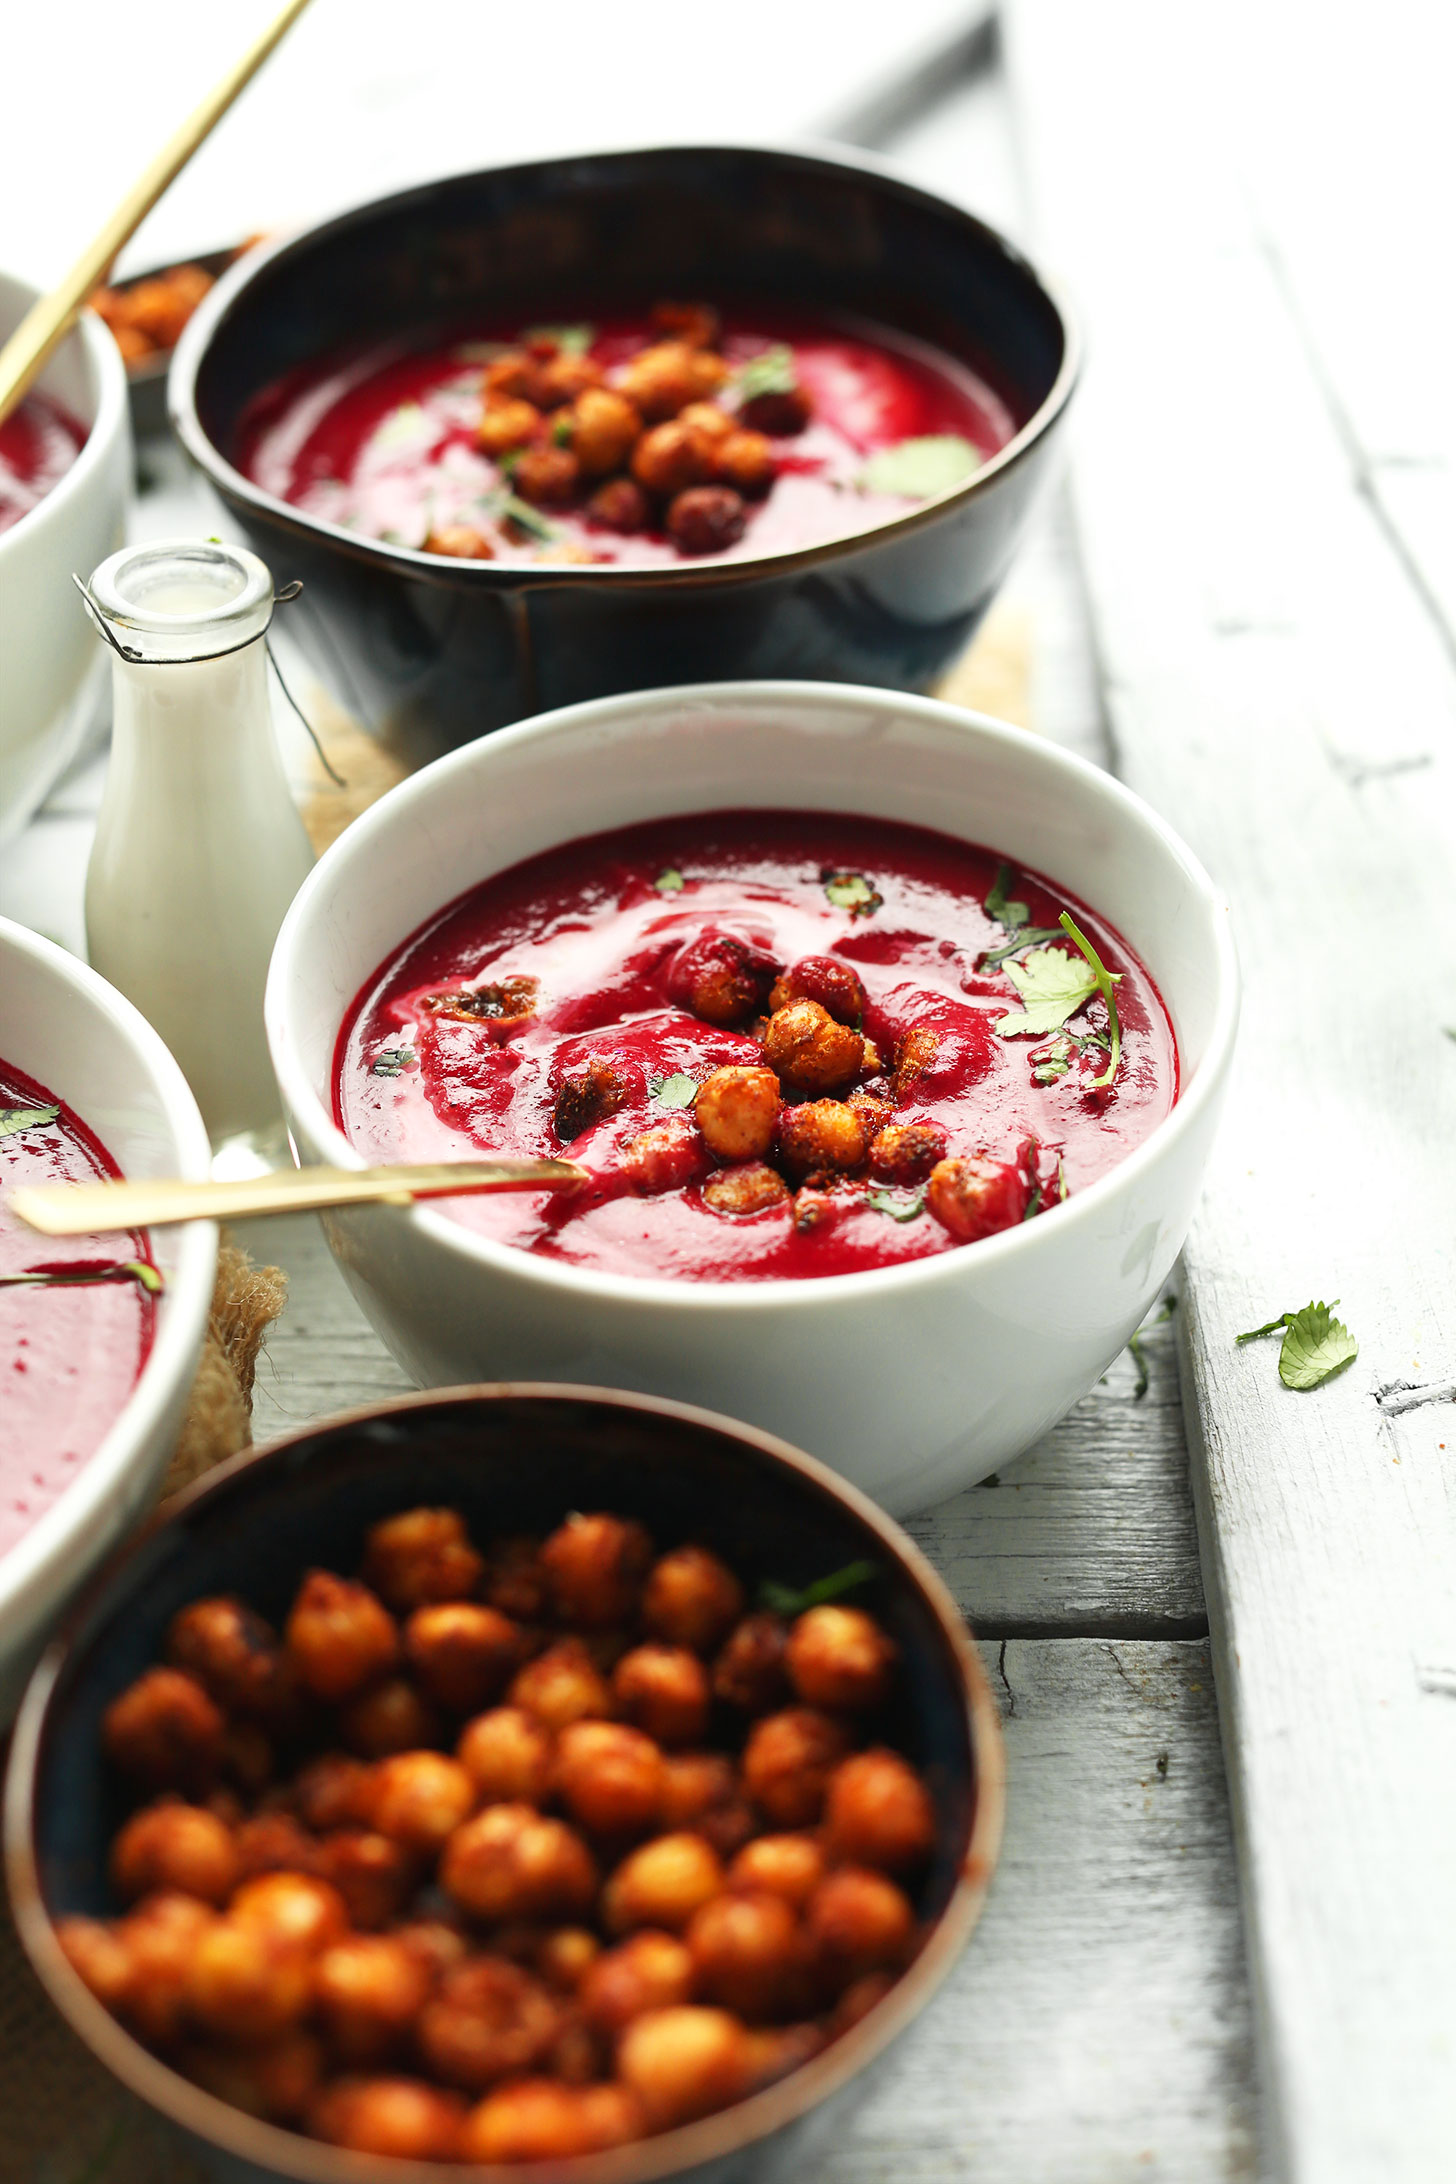 Bowls of our flavorful gluten-free vegan Curried Beet Soup topped with Crispy Tandoori Chickpeas